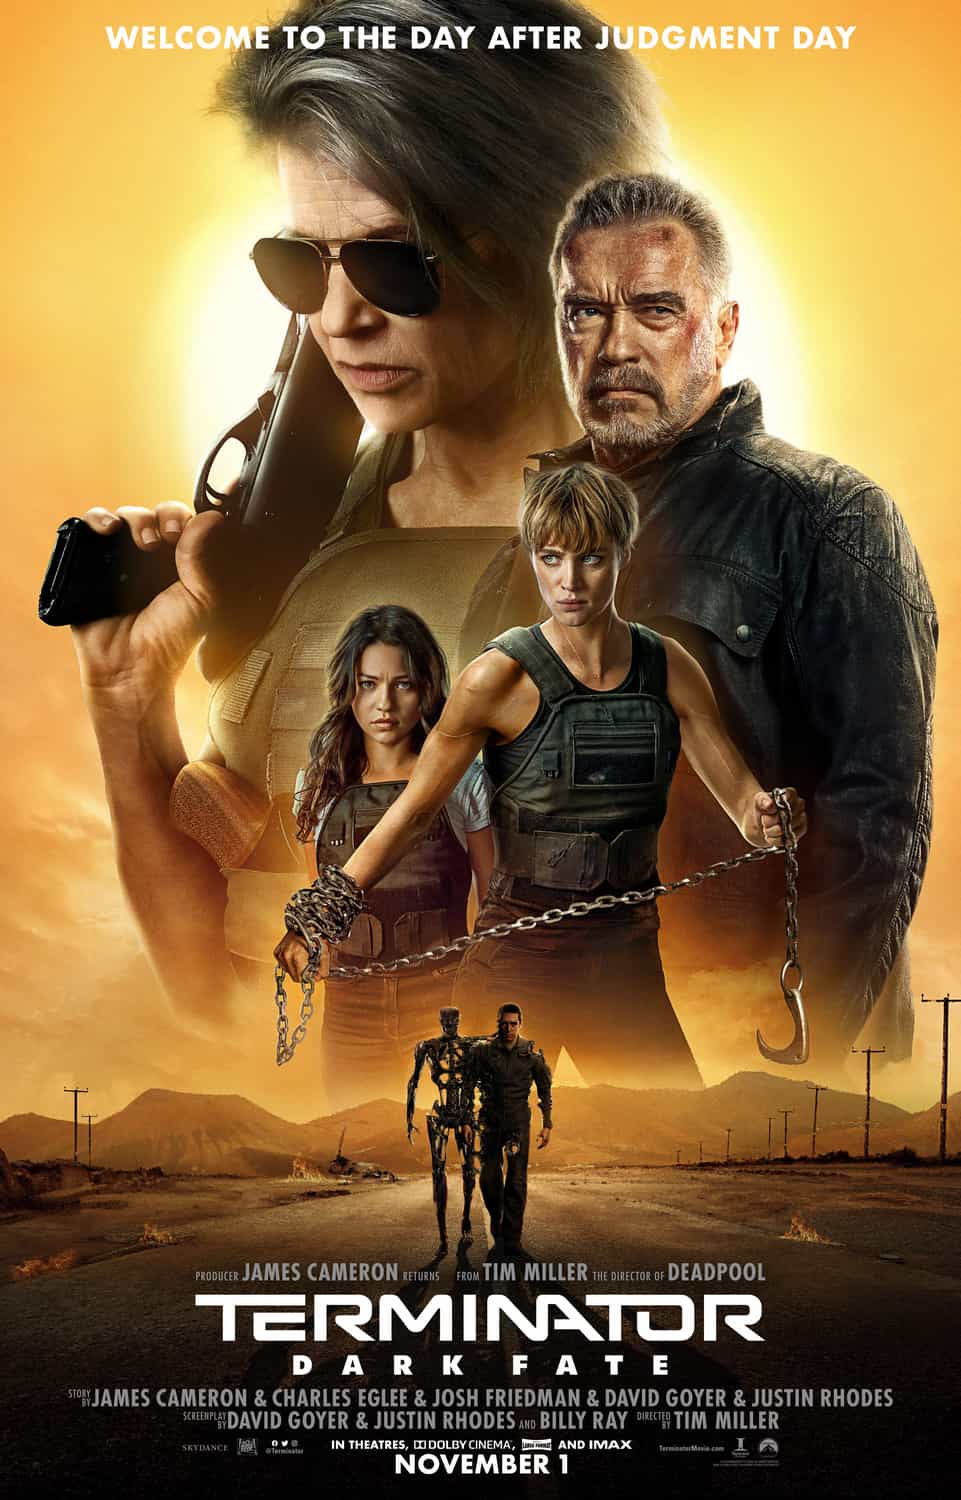 New images from Terminator: Dark Fate come in from CinemaCon which a look at Arnold Schwarzenegger